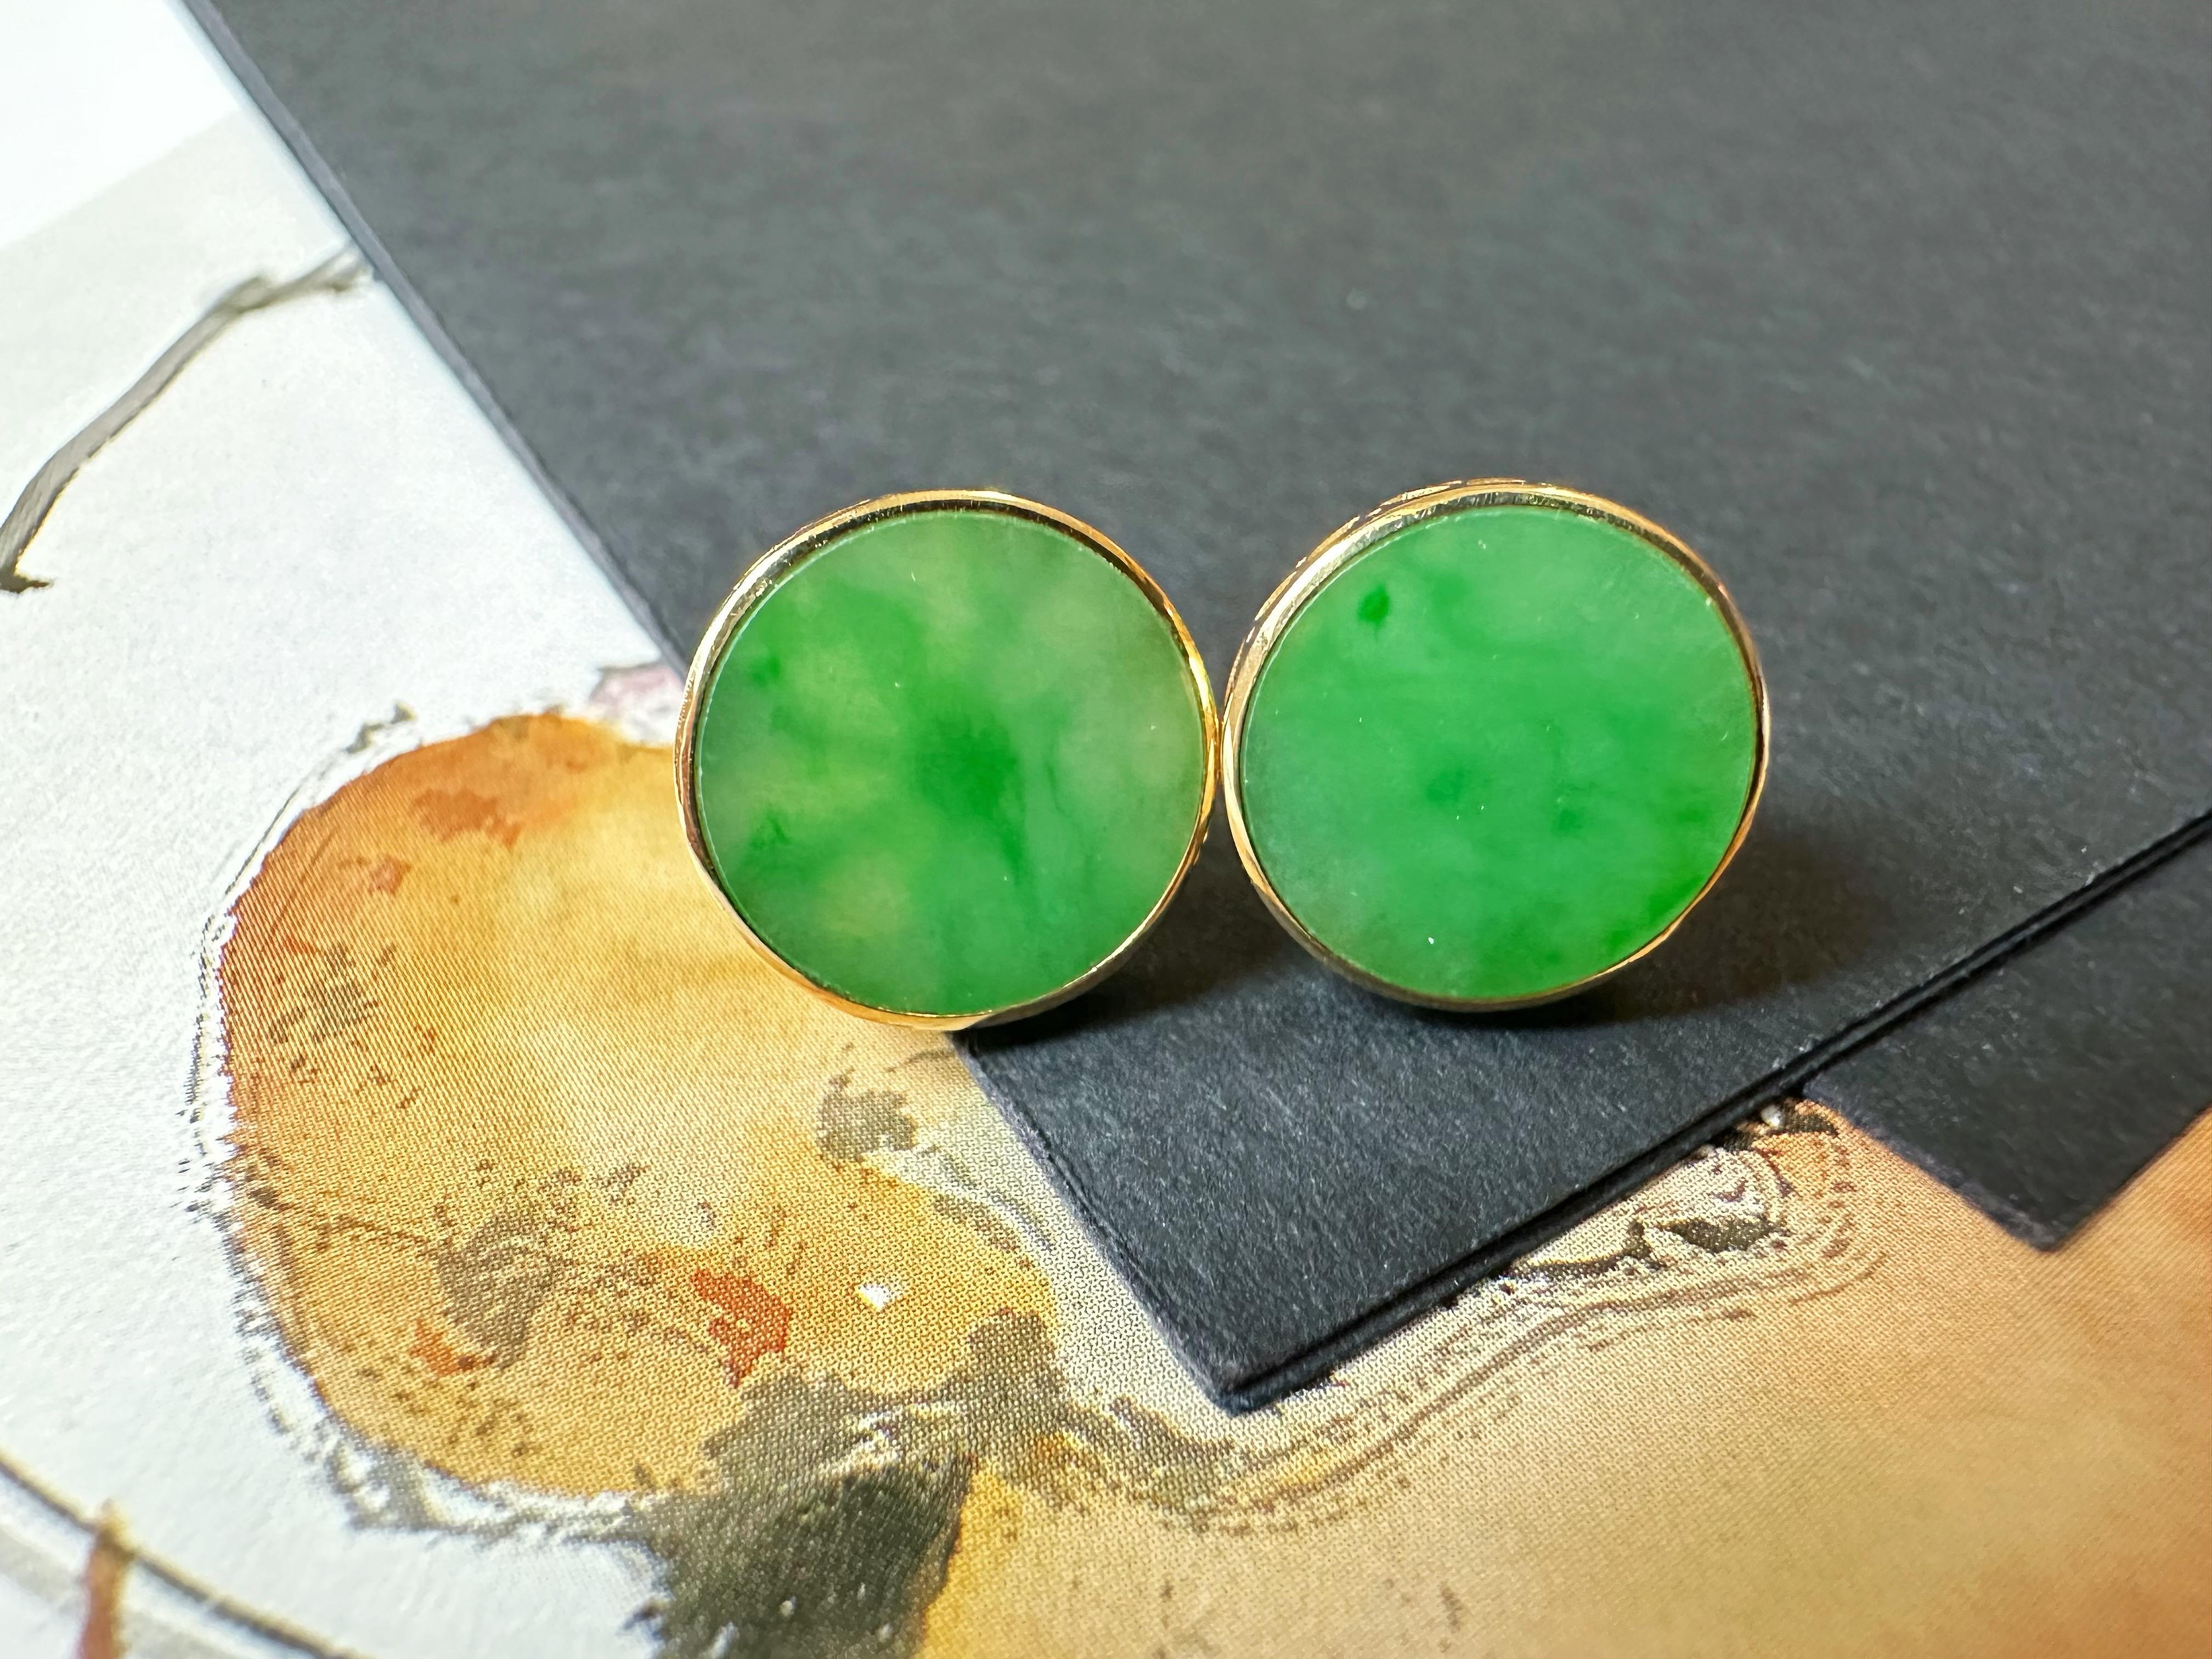 Introducing our Natural Myanmar Imperial Green Icy Type Round Jadeite Earrings in 18K Gold, a stunning pair of ear studs that exude elegance and charm.

These exquisite earrings feature round jadeite gemstones sourced from Myanmar, renowned for